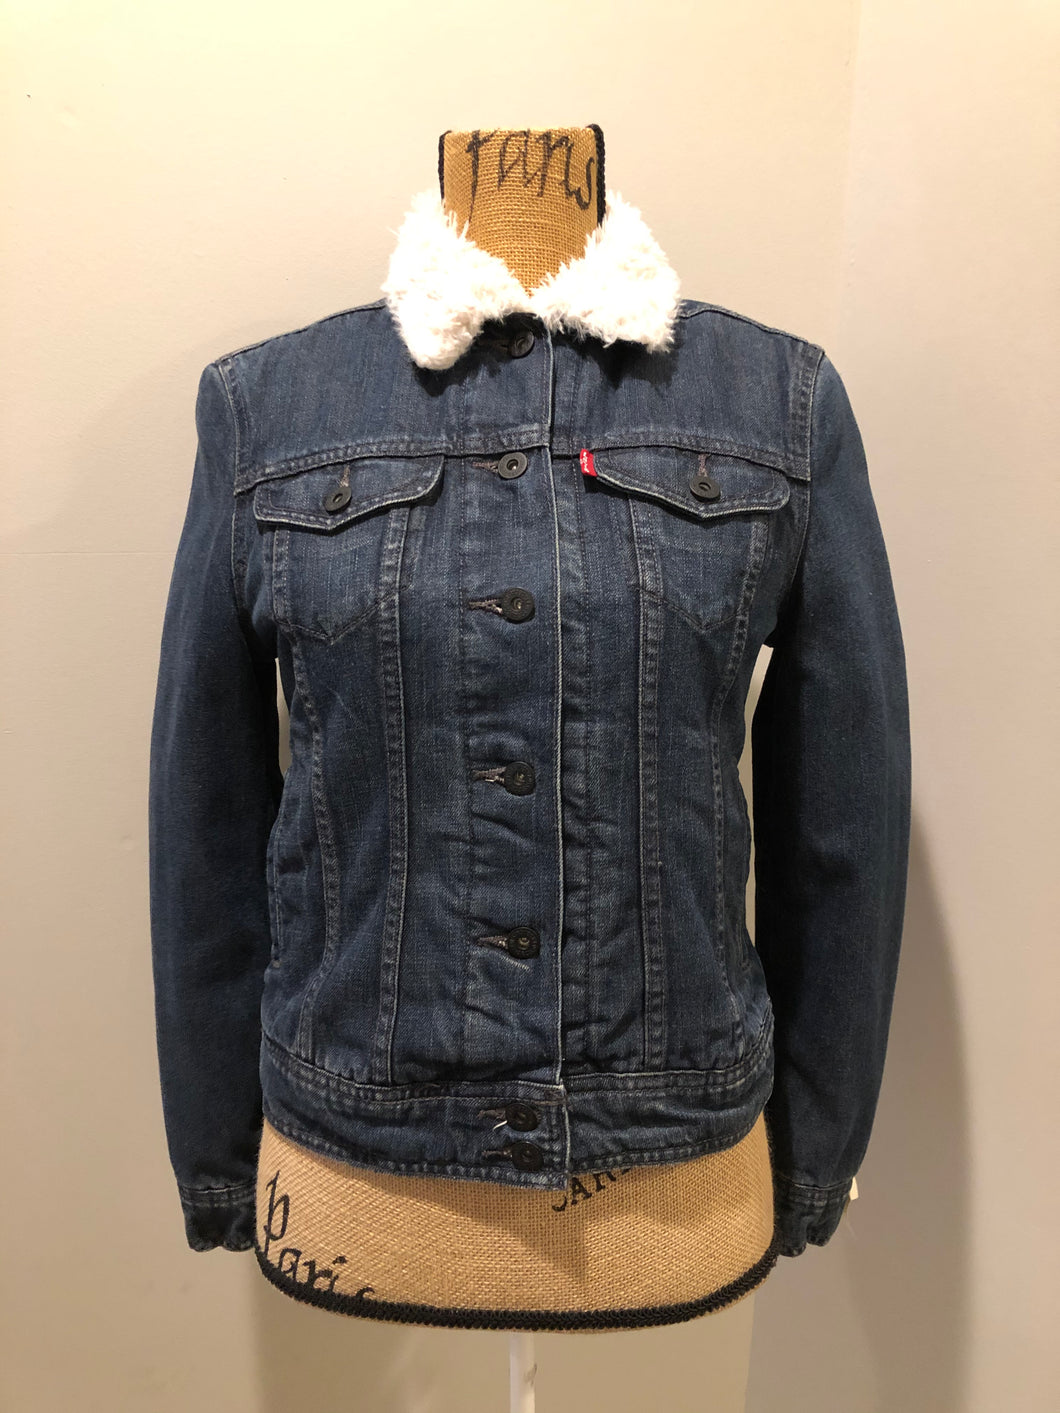 Kingspier Vintage - Levi’s denim Sherpa jacket in a faded dark wash with button closures, vertical pockets and flap pockets. Size small.